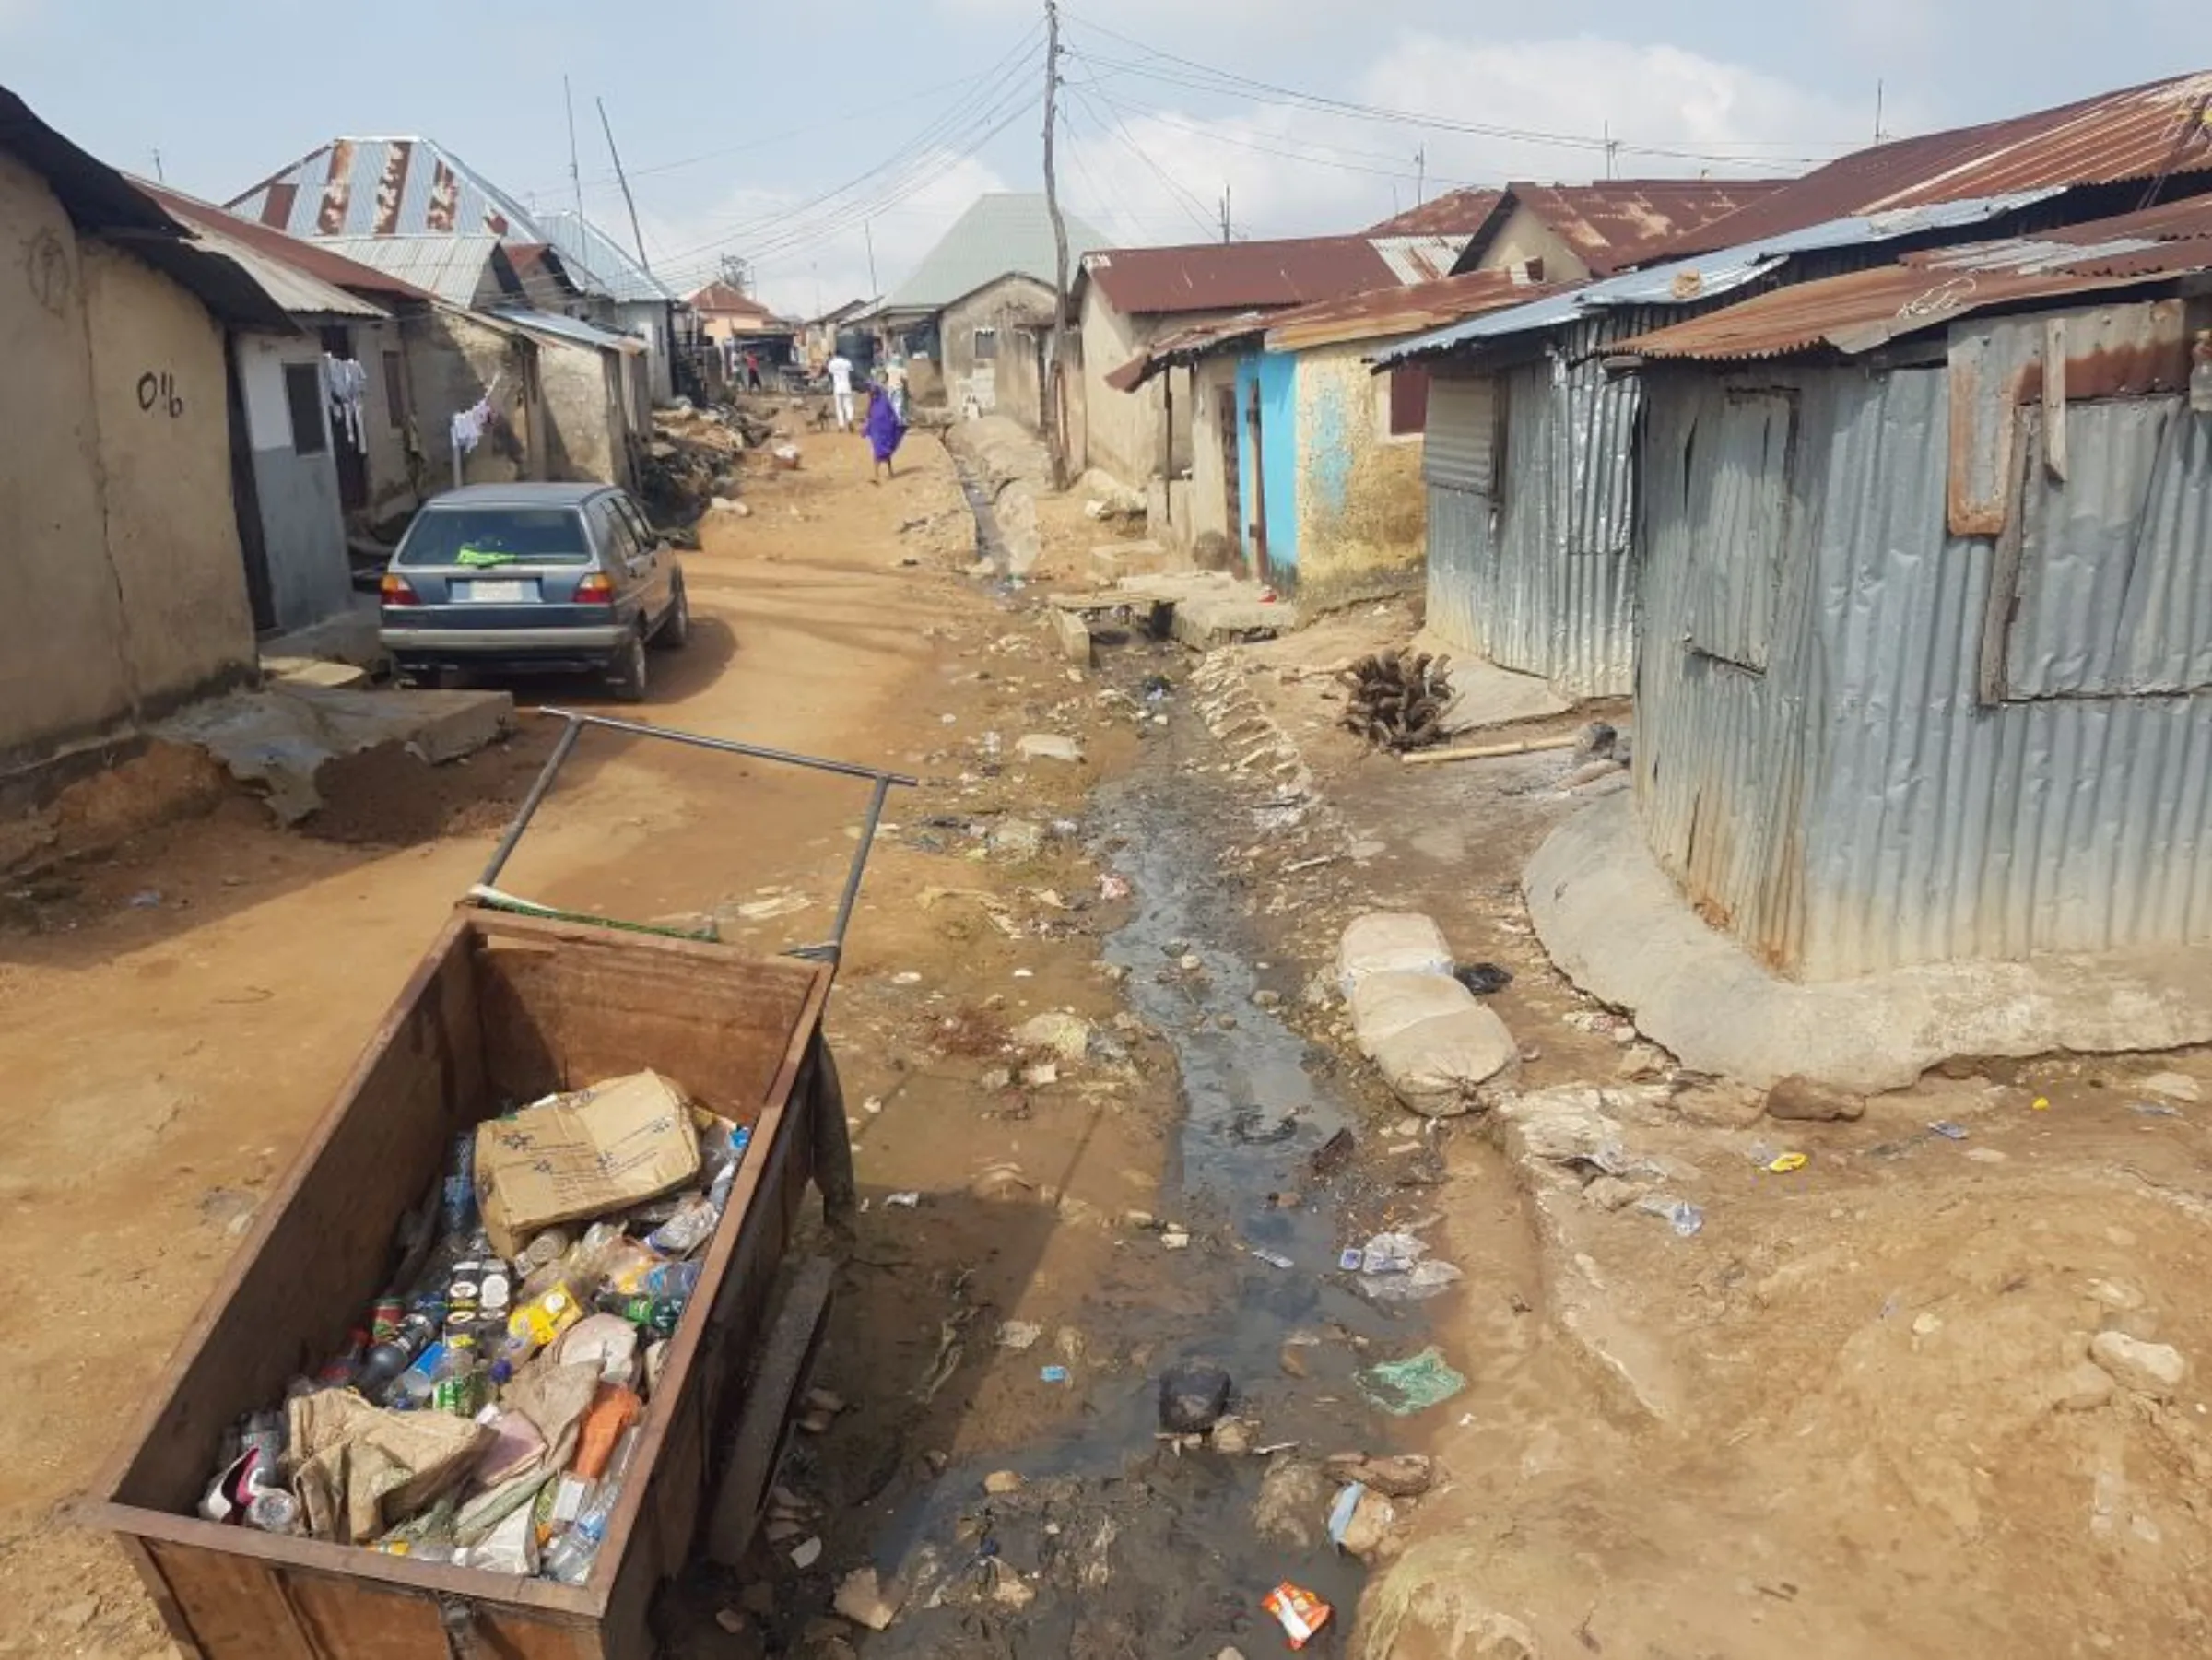 Houses on a street in Abuja's Big Bola slum, built with corrugated iron sheets beside dirty water channels in Abuja, Nigeria. October 26, 2022